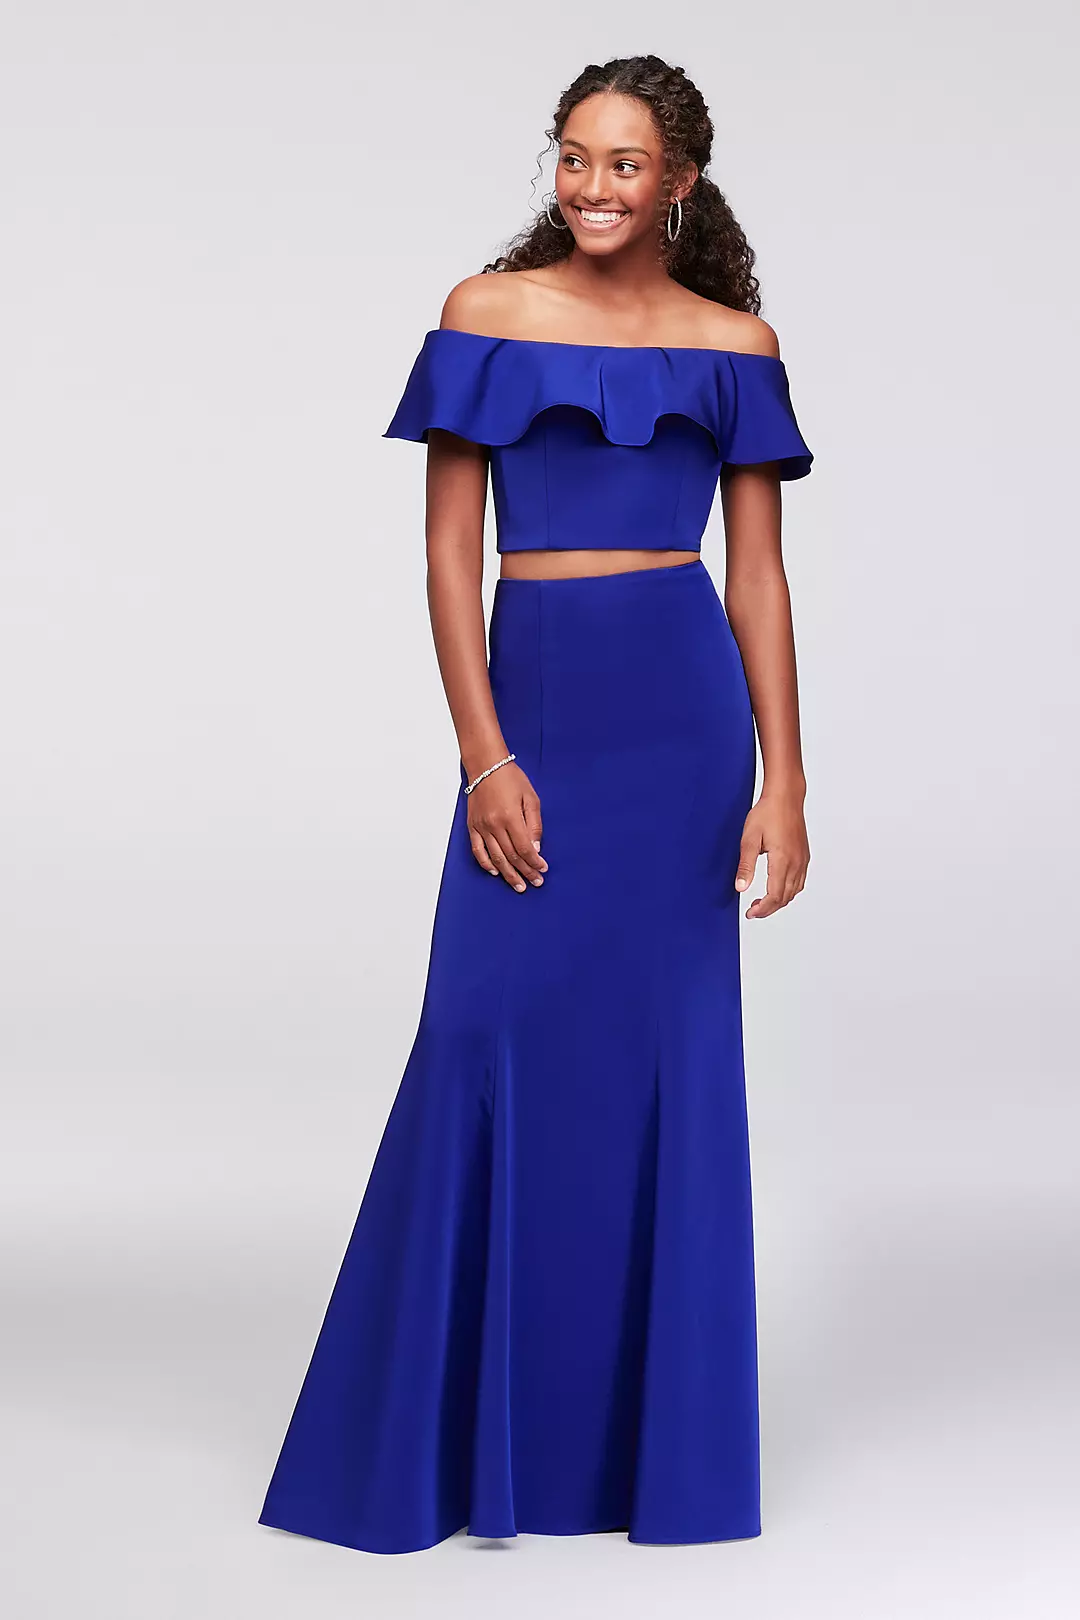 Ruffled Off-the-Shoulder Two-Piece Mermaid Dress Image